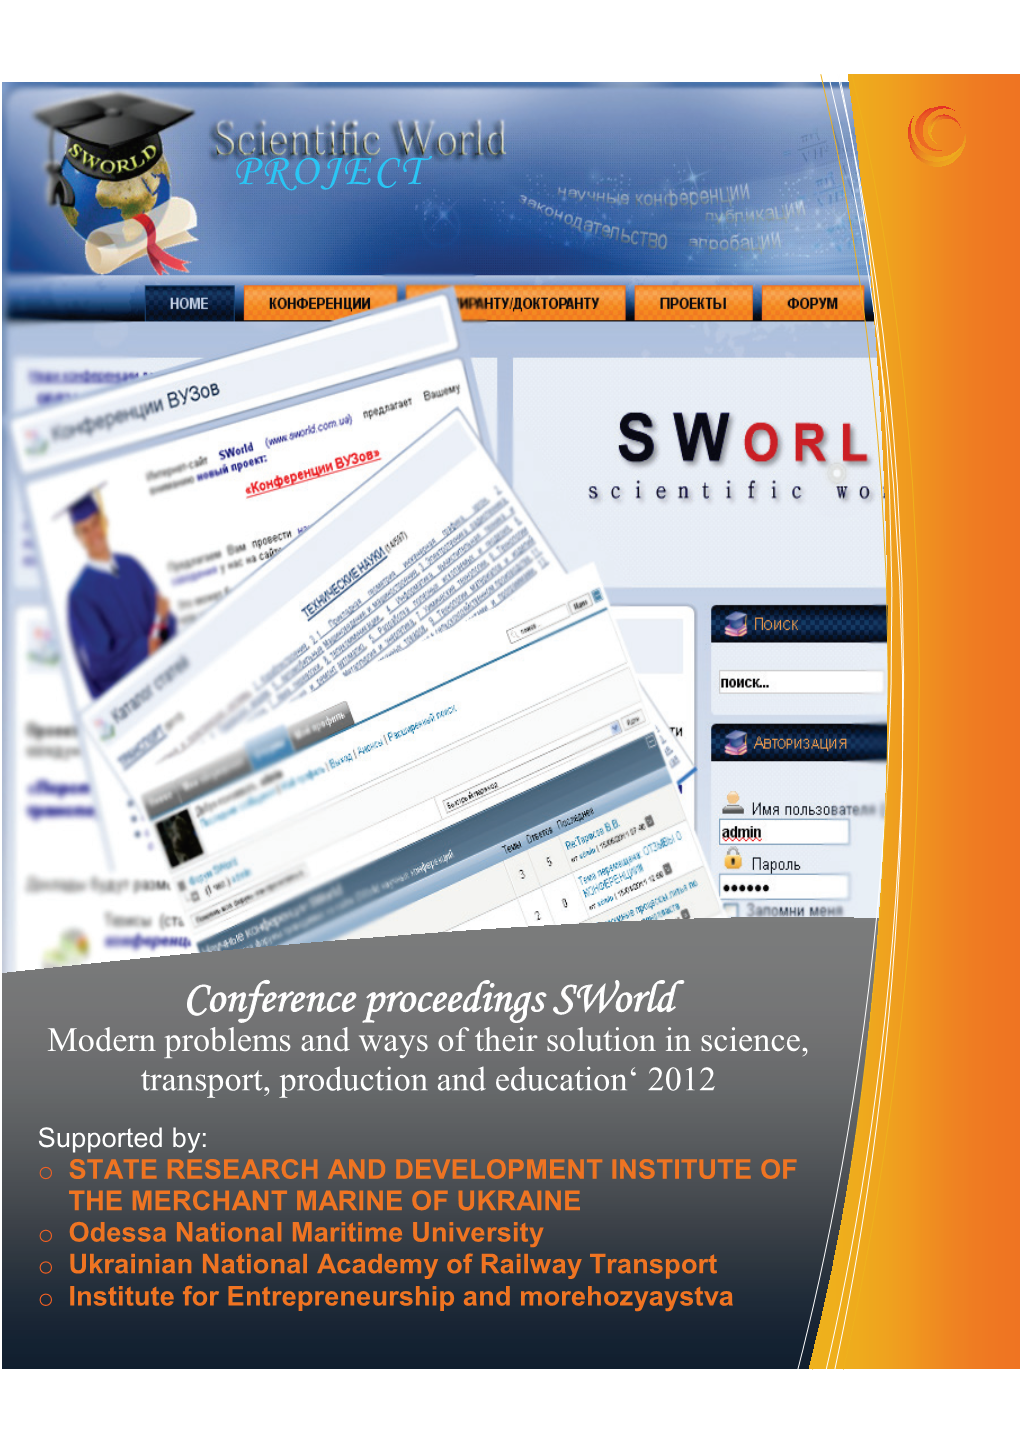 PROJECT Conference Proceedings Sworld